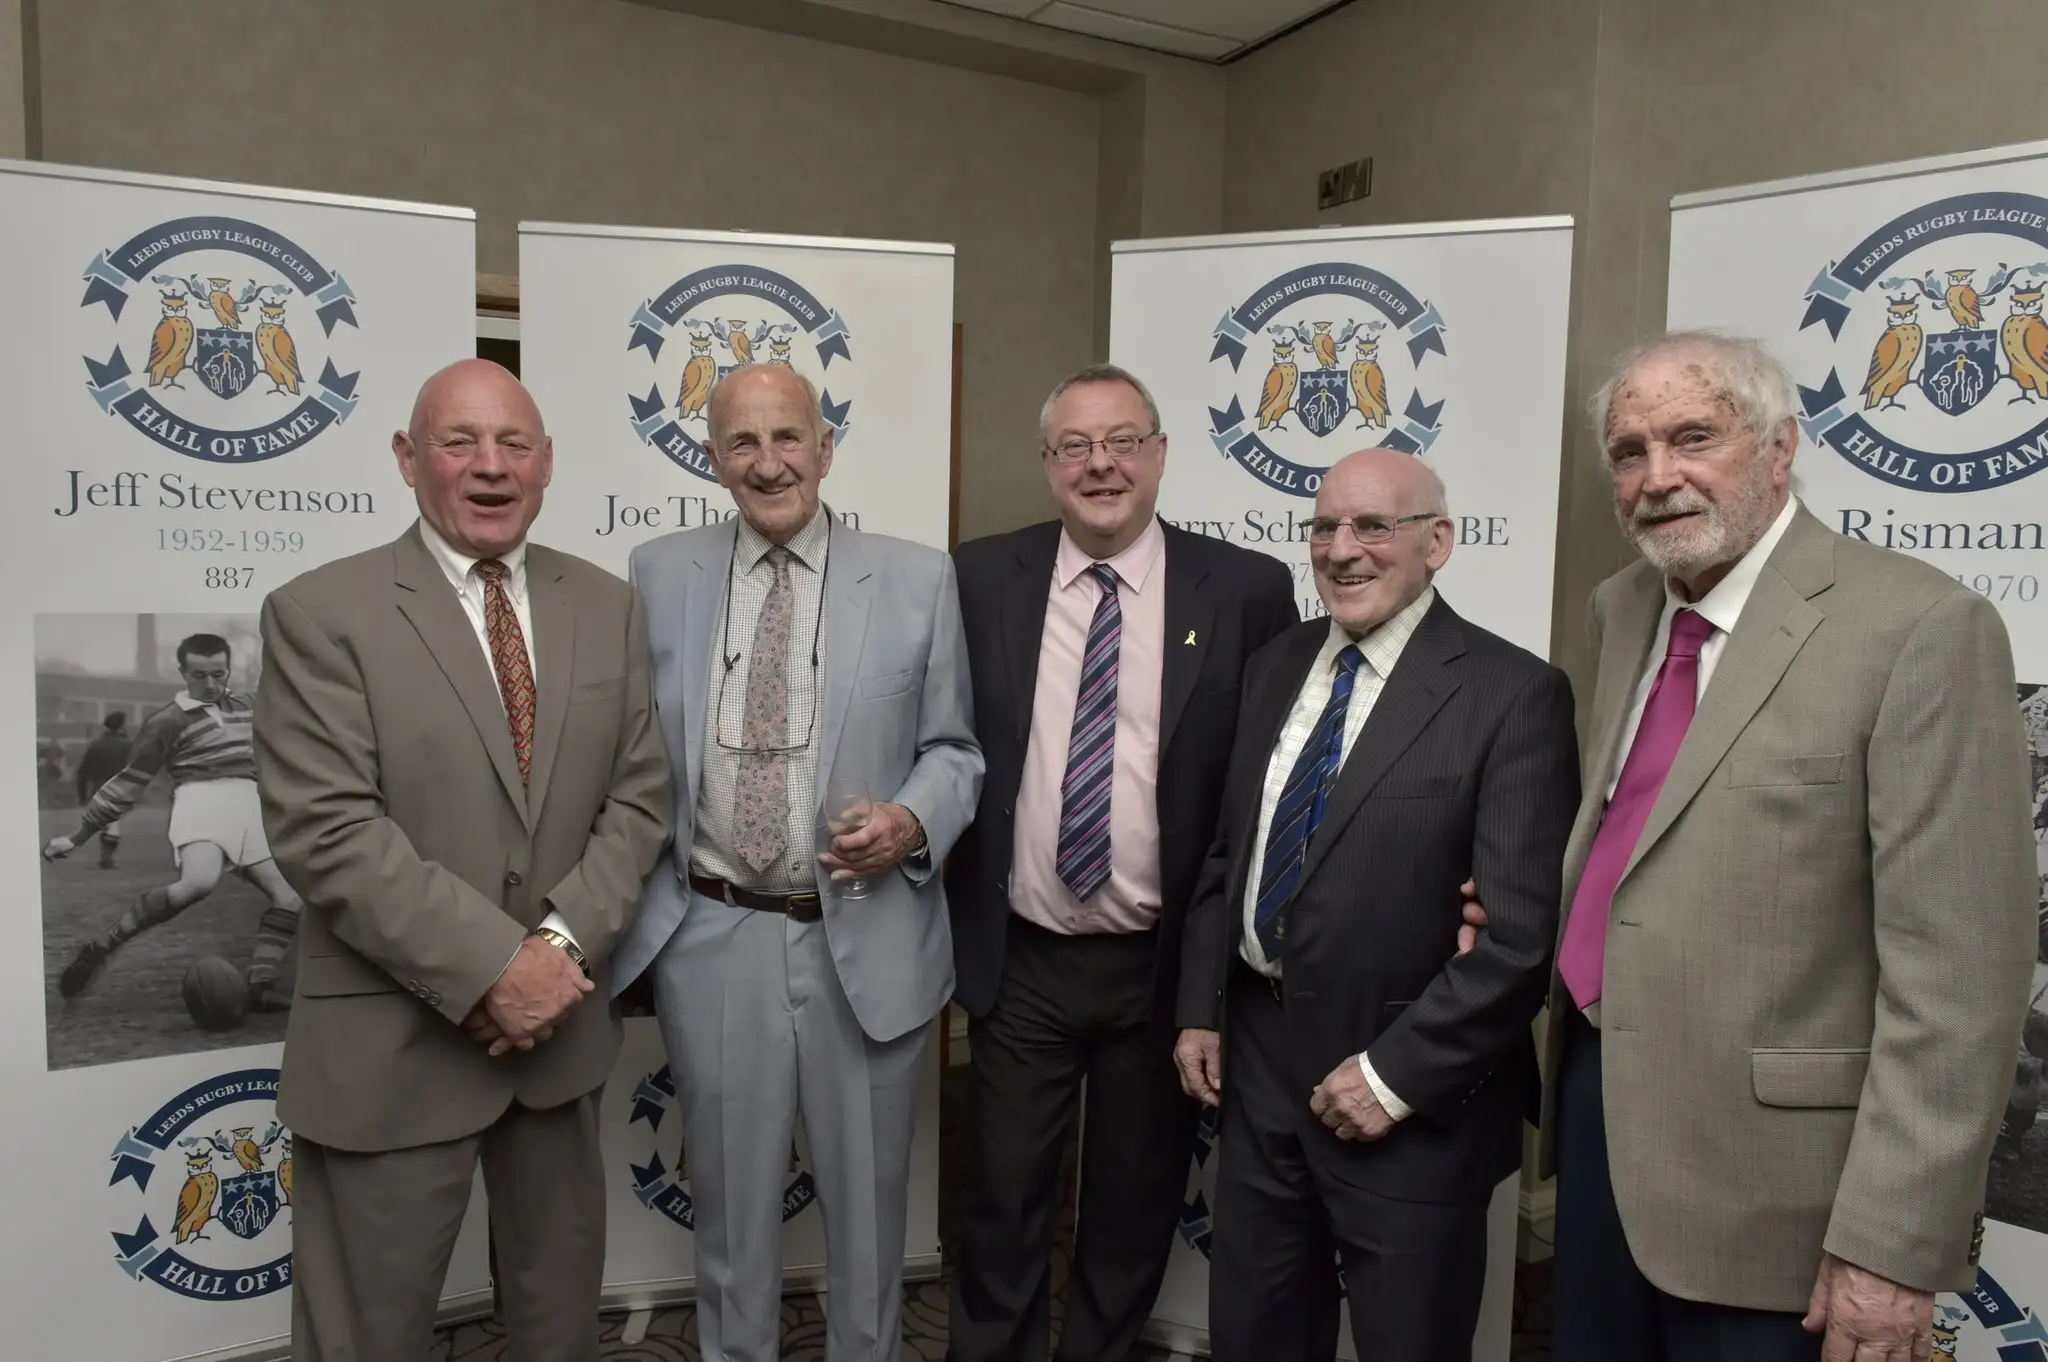 Four legends inducted into Leeds Rugby League Hall of Fame